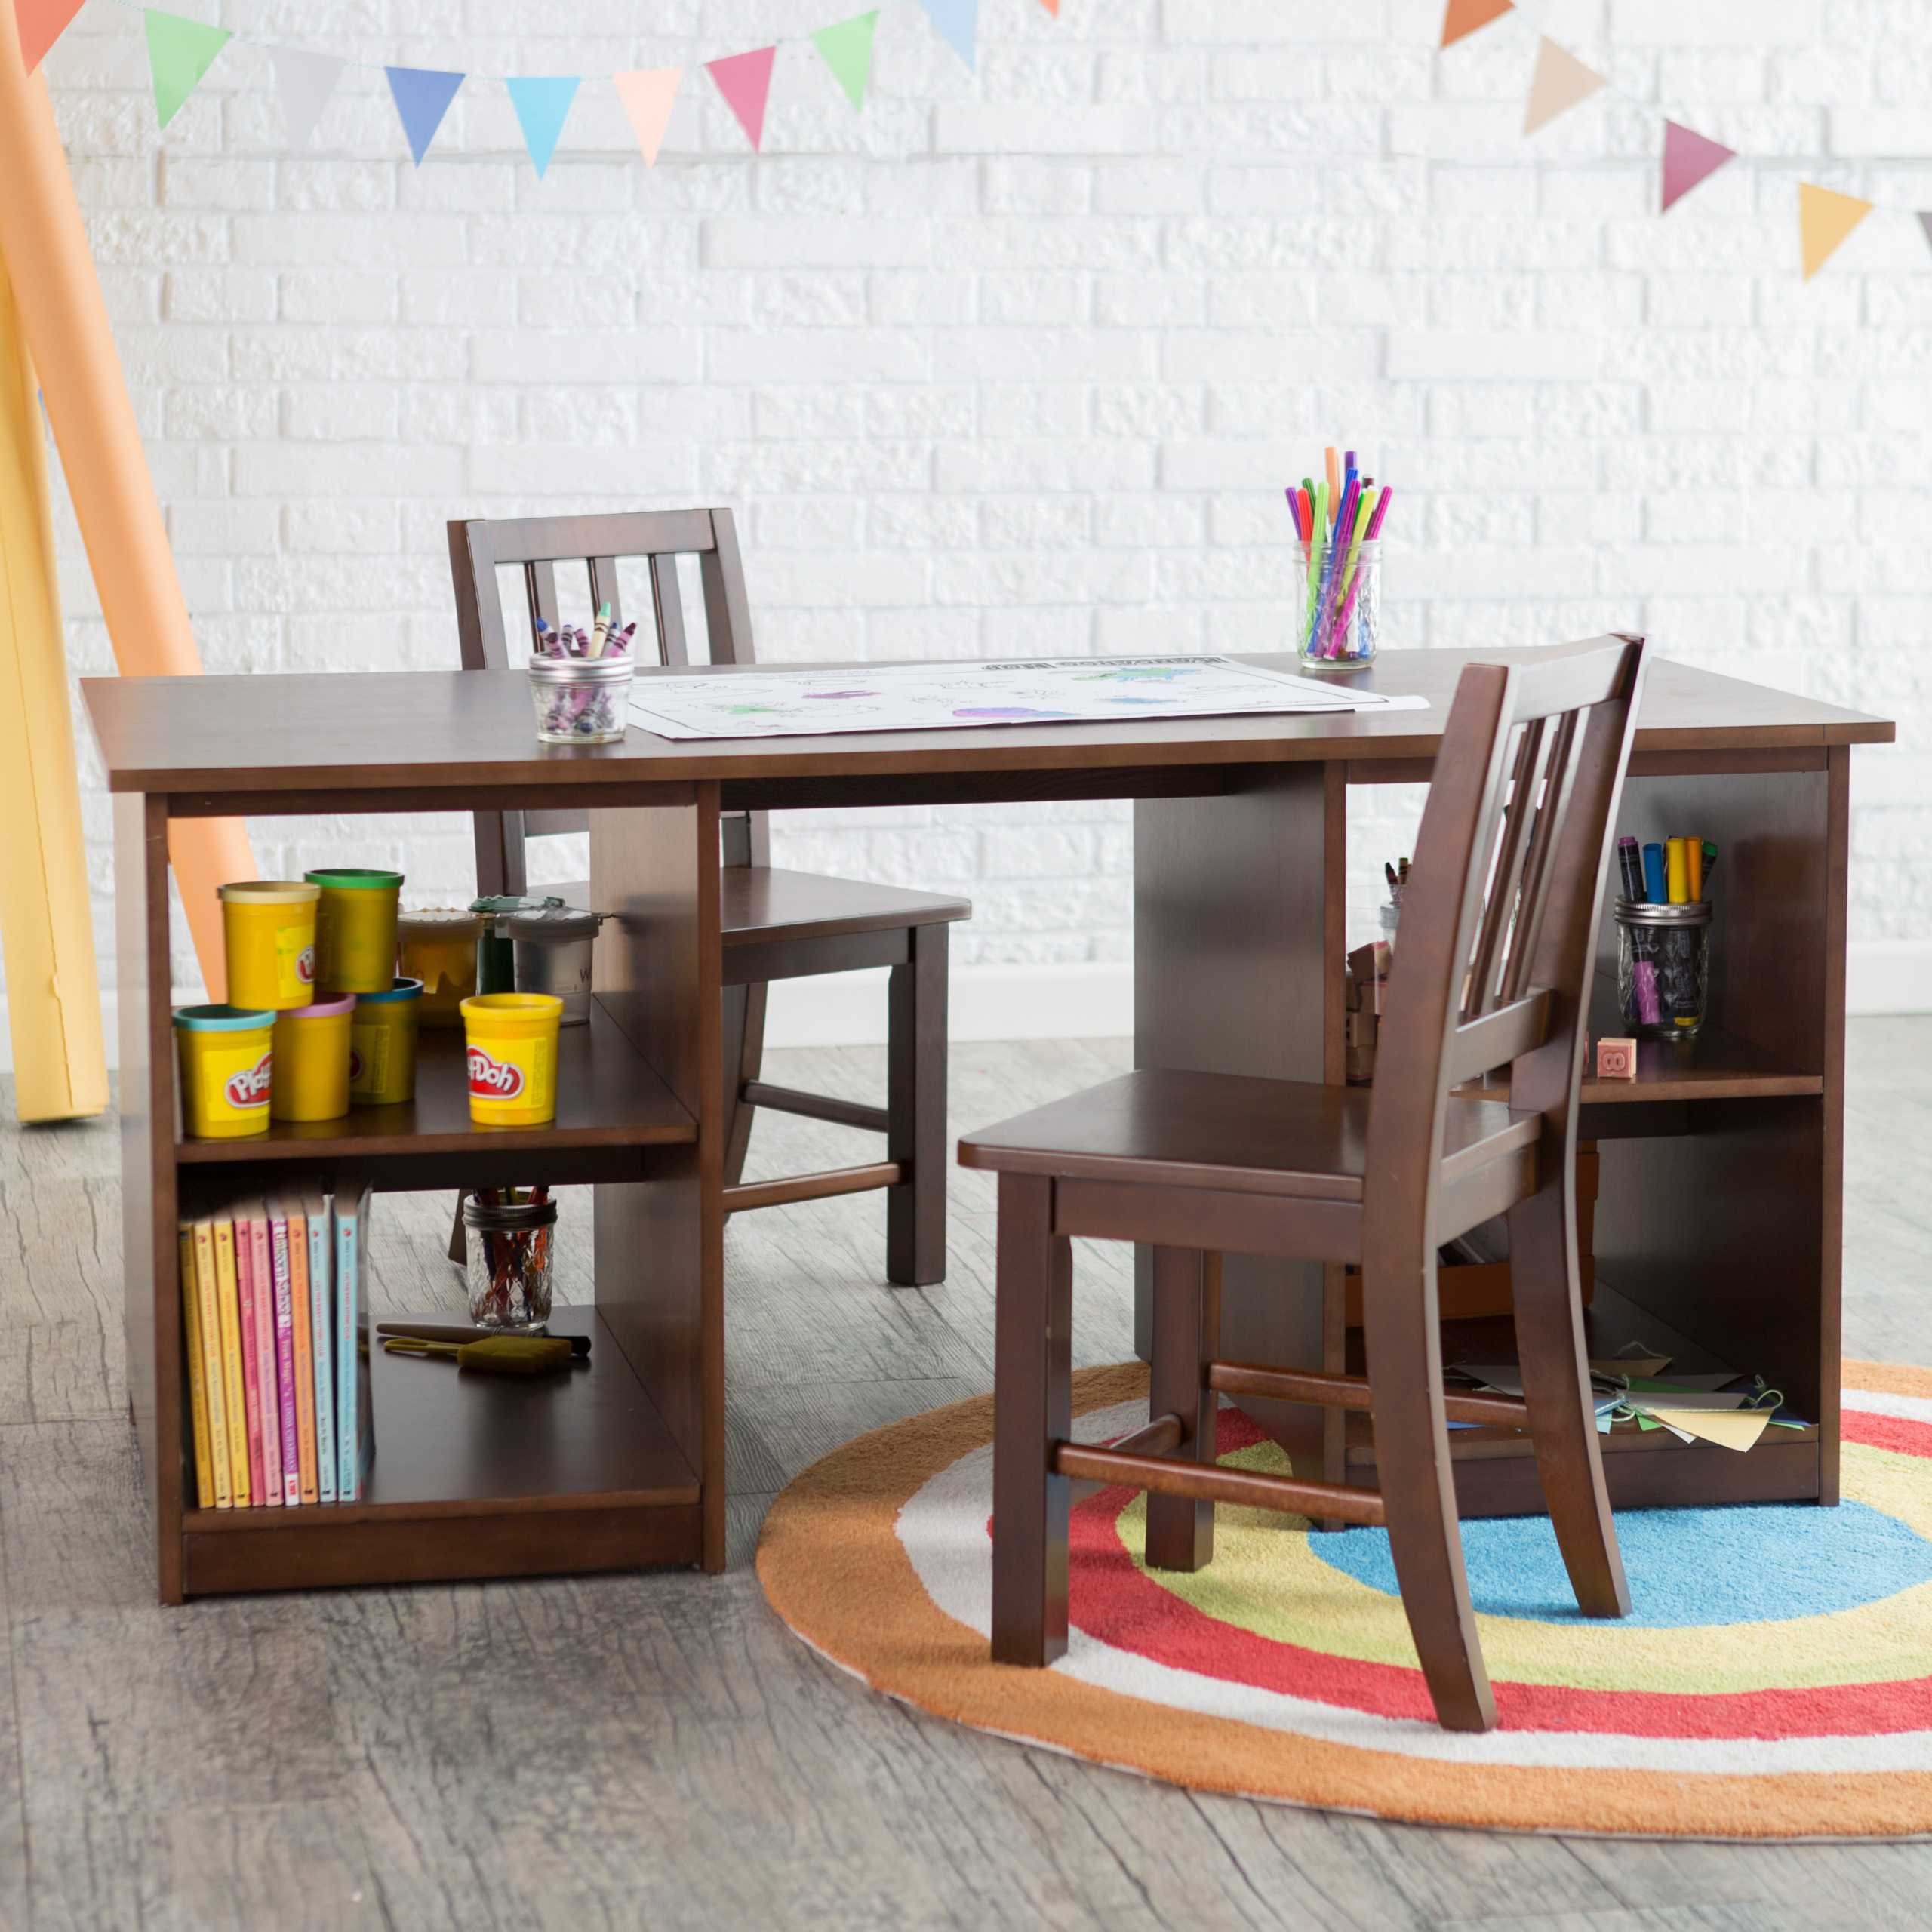 Kids activity table with storage 11